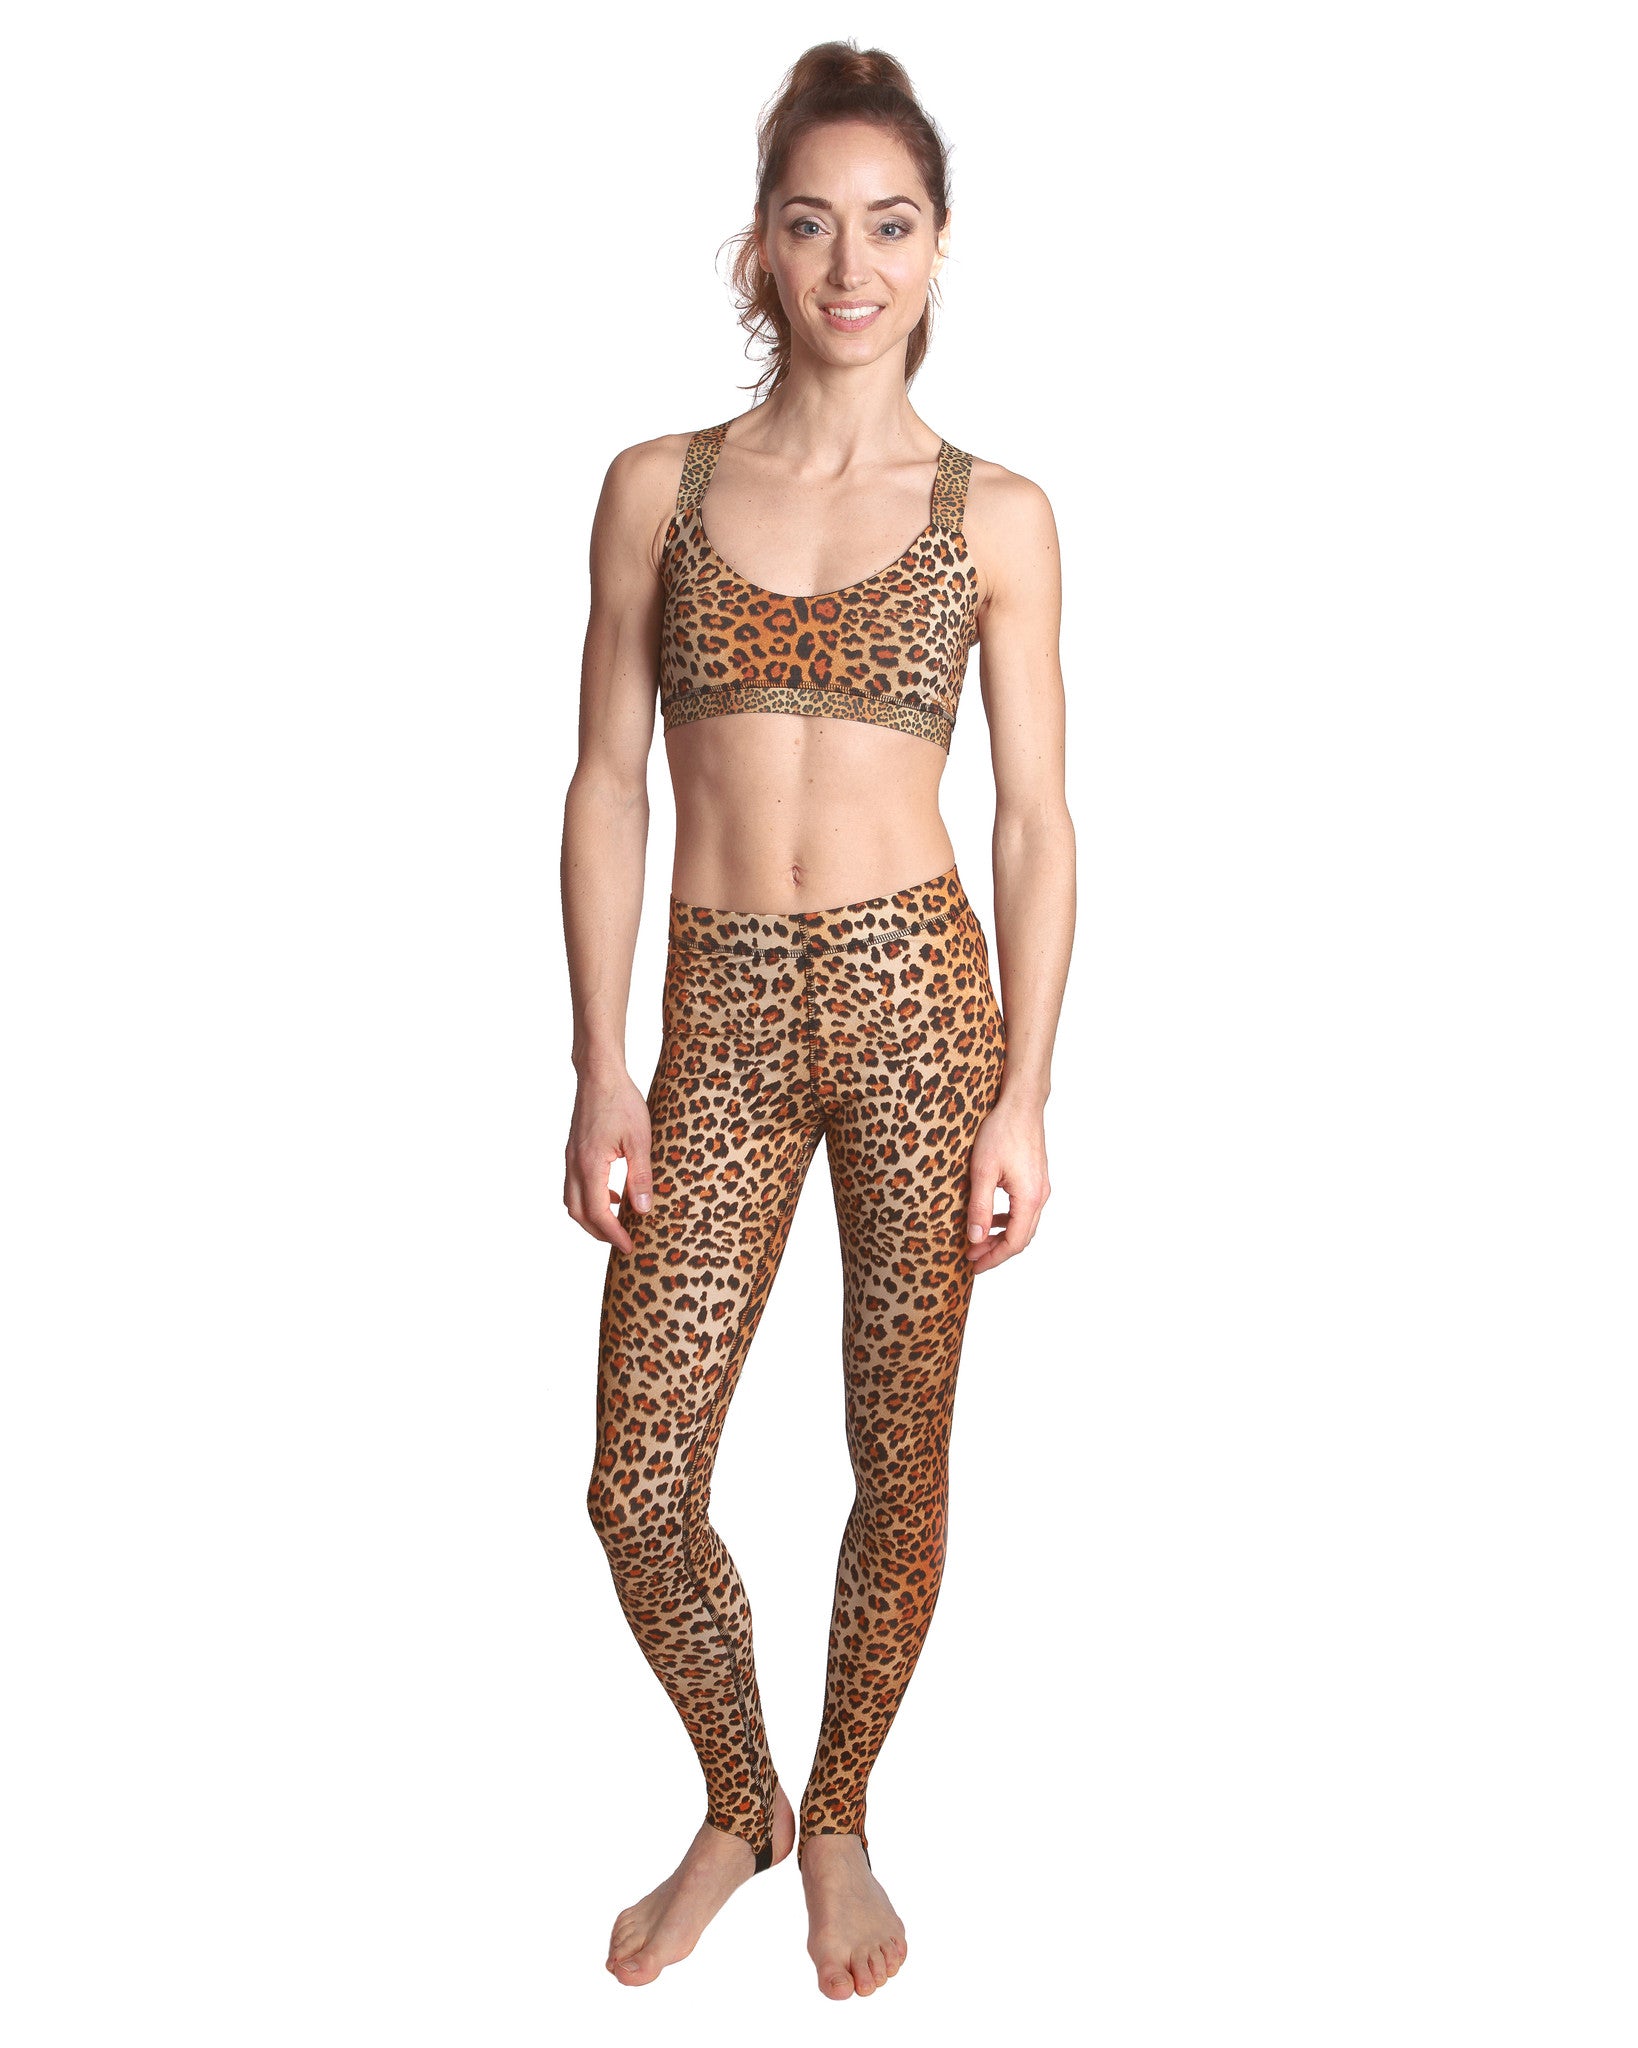 Leopard print gym leggings - Printed tights for workouts like yoga